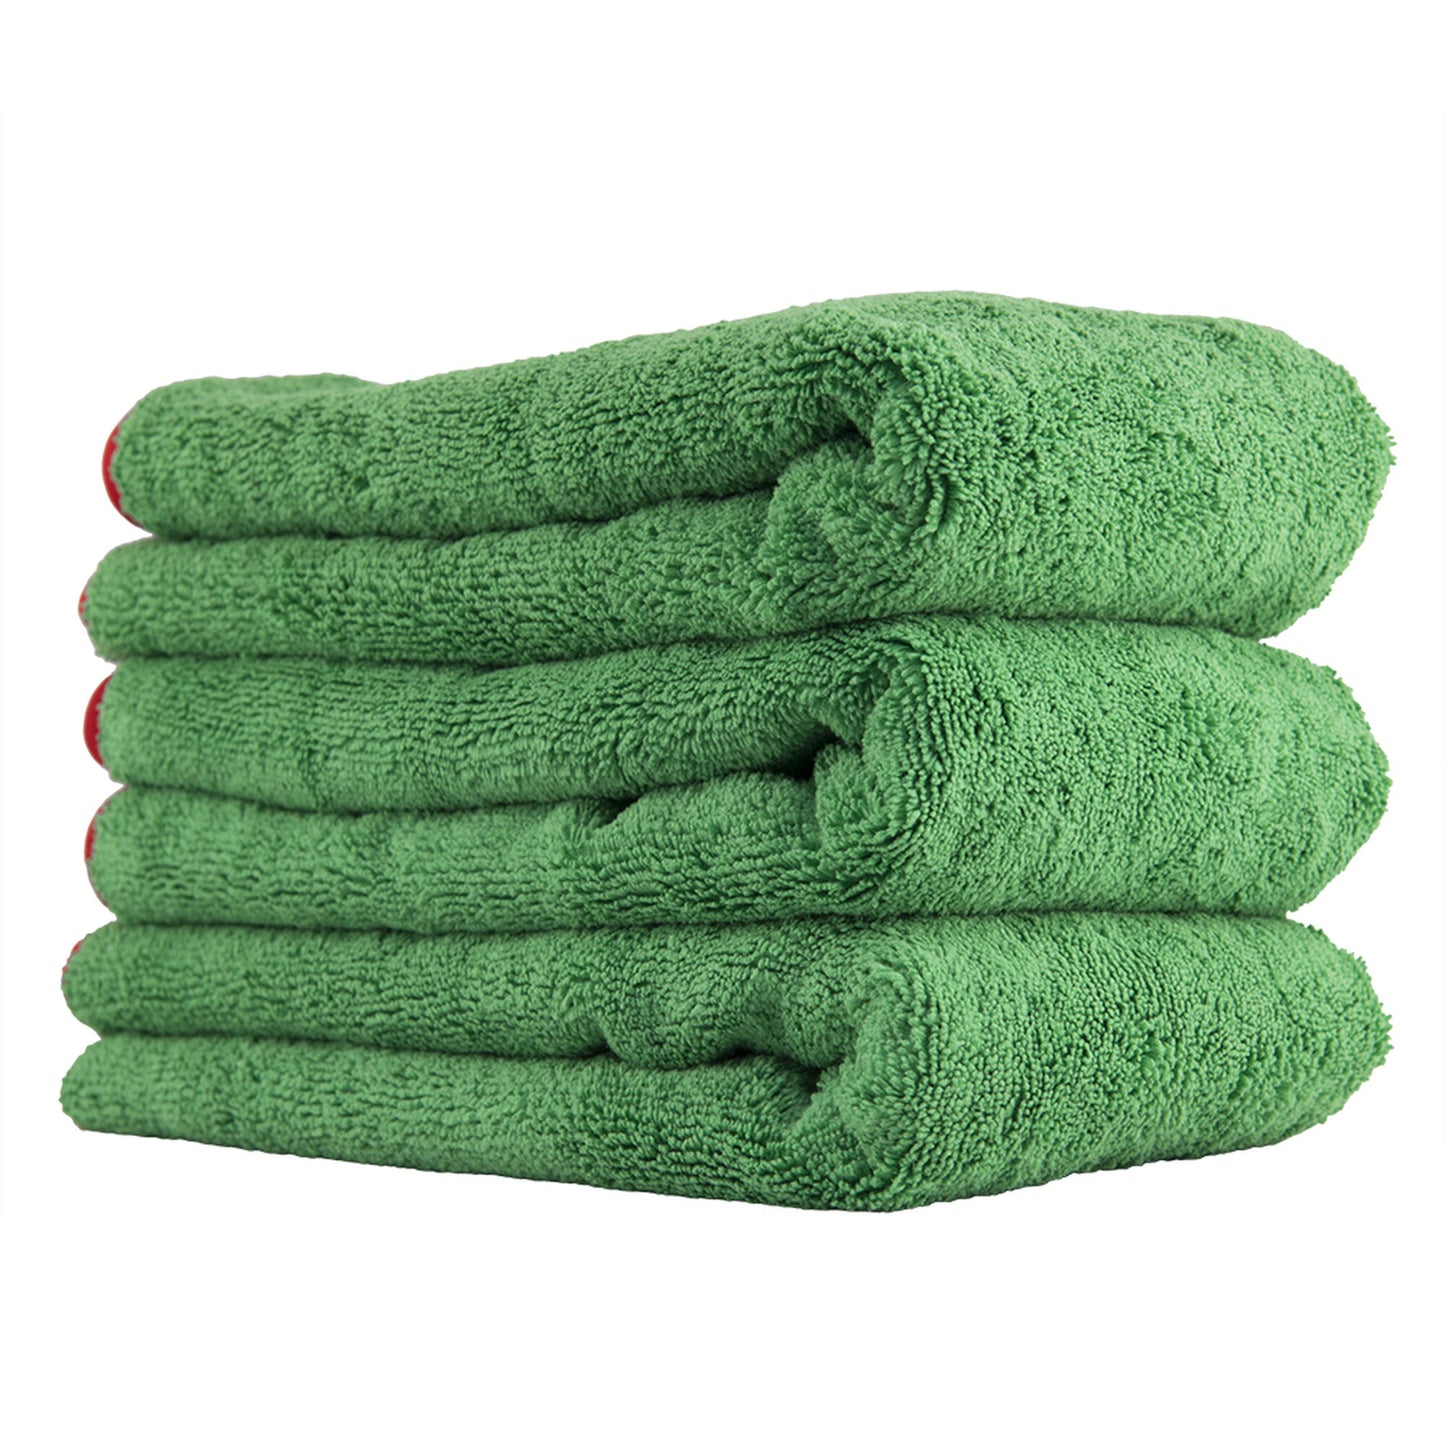 Fluffer Miracle Green Towel w/ Banded Red Edges 3 Pack